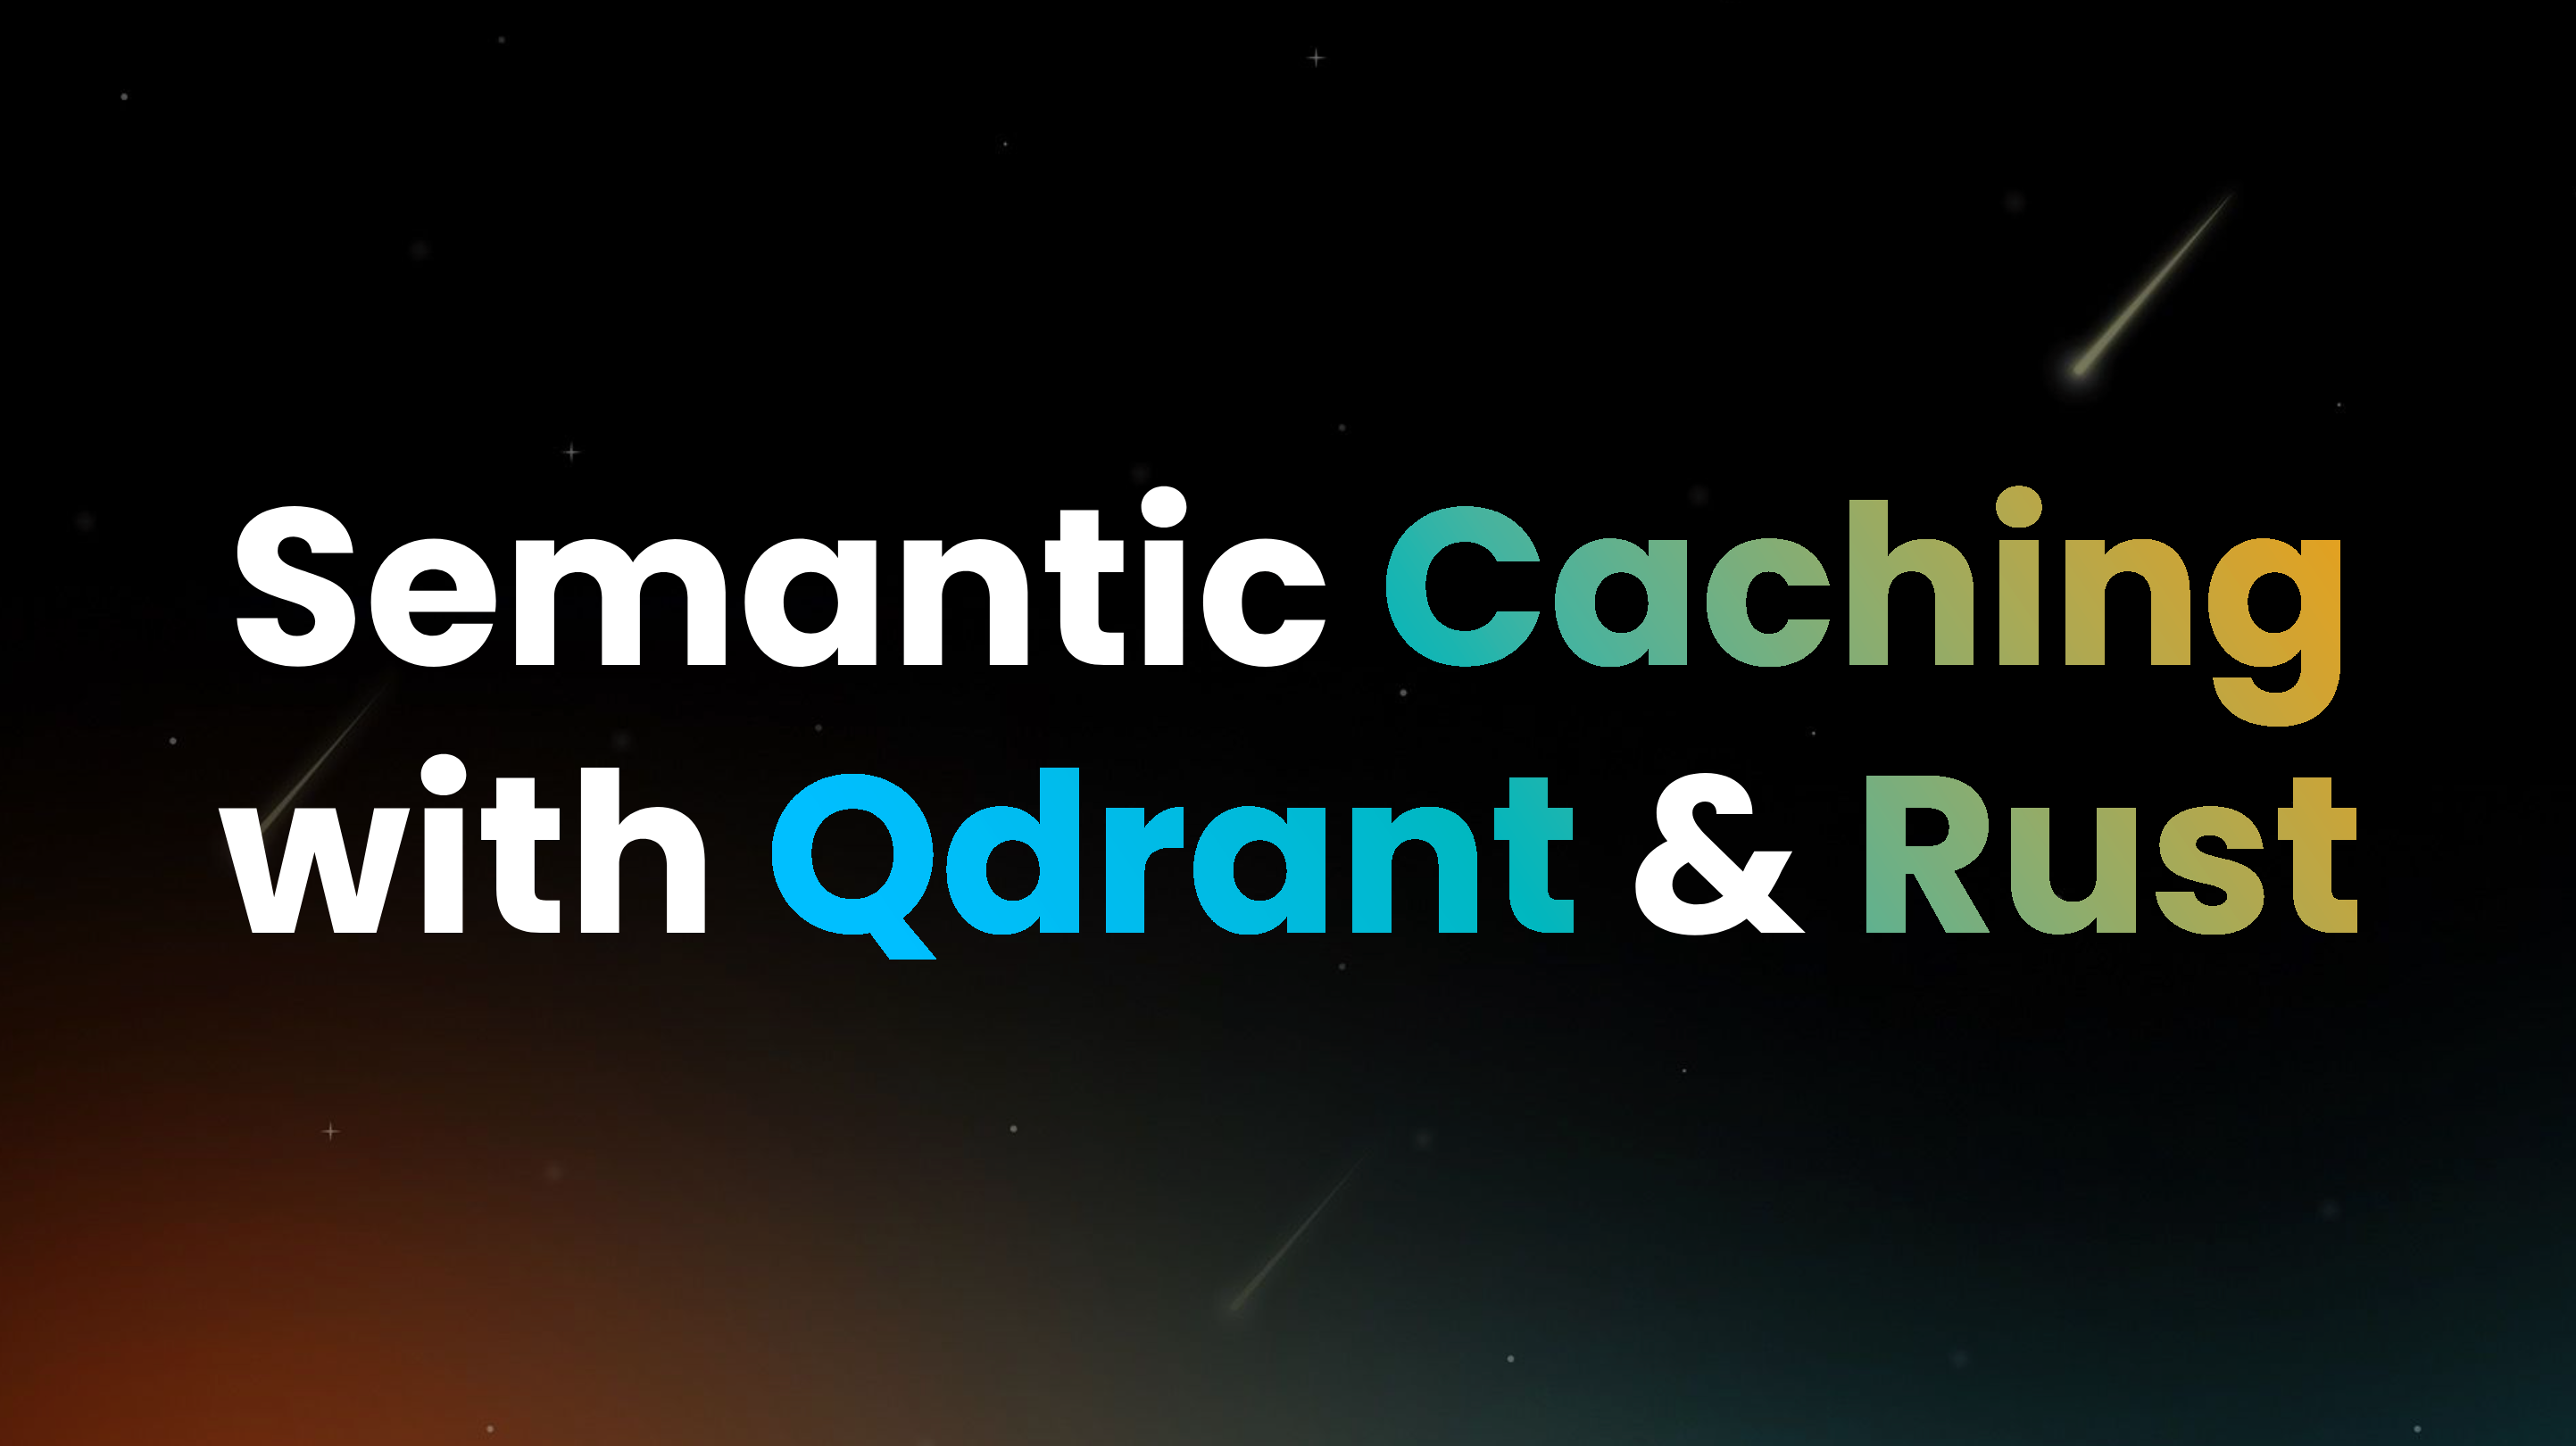 Implementing Semantic Caching with Qdrant & Rust